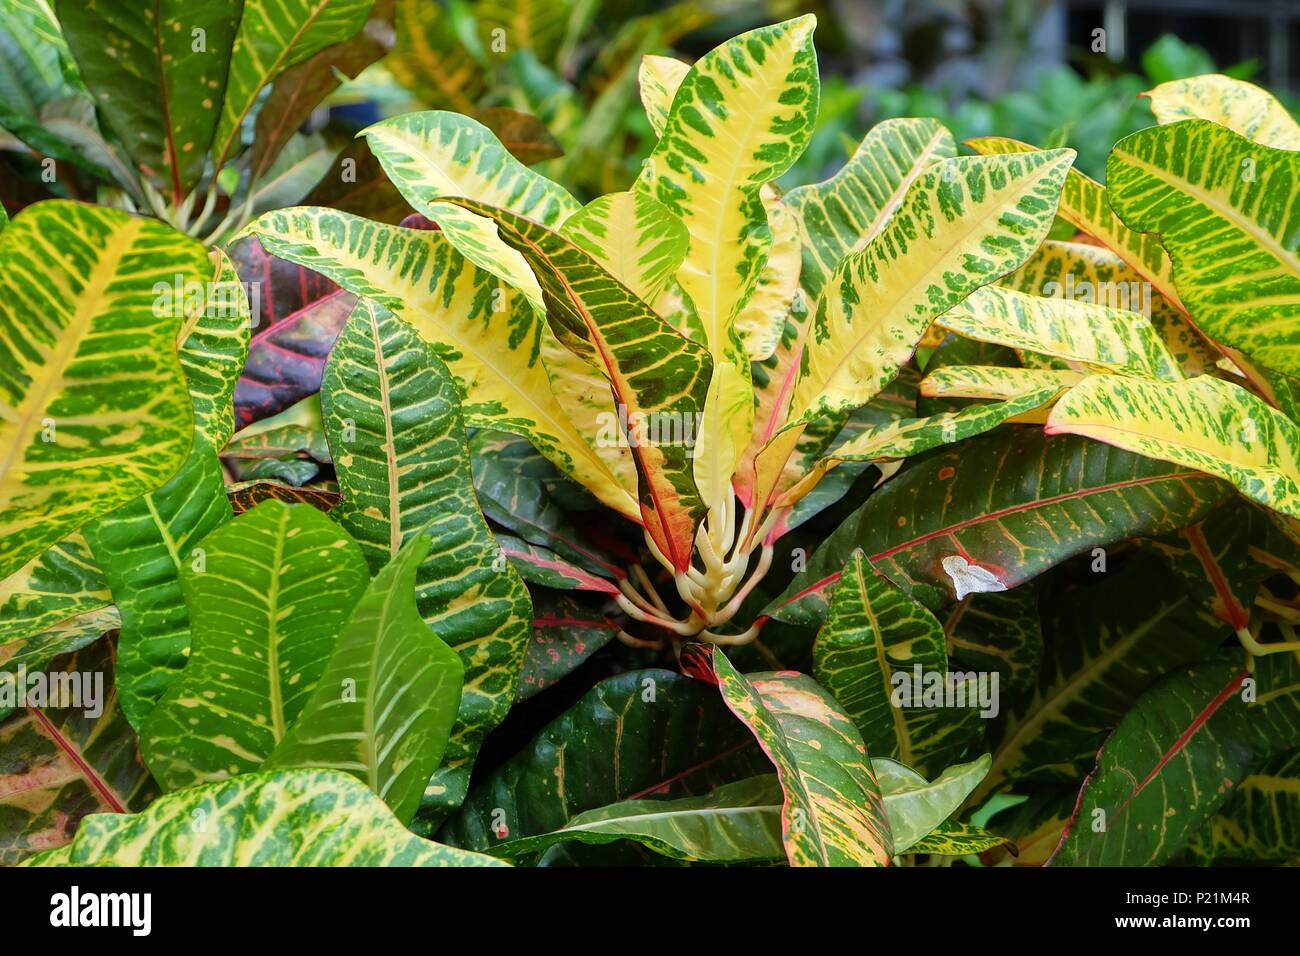 Flower and Plant, Beautiful Green and Yellow Spot Croton Plants or Codiaeum Variegatium Plants For Garden Decor. Stock Photo